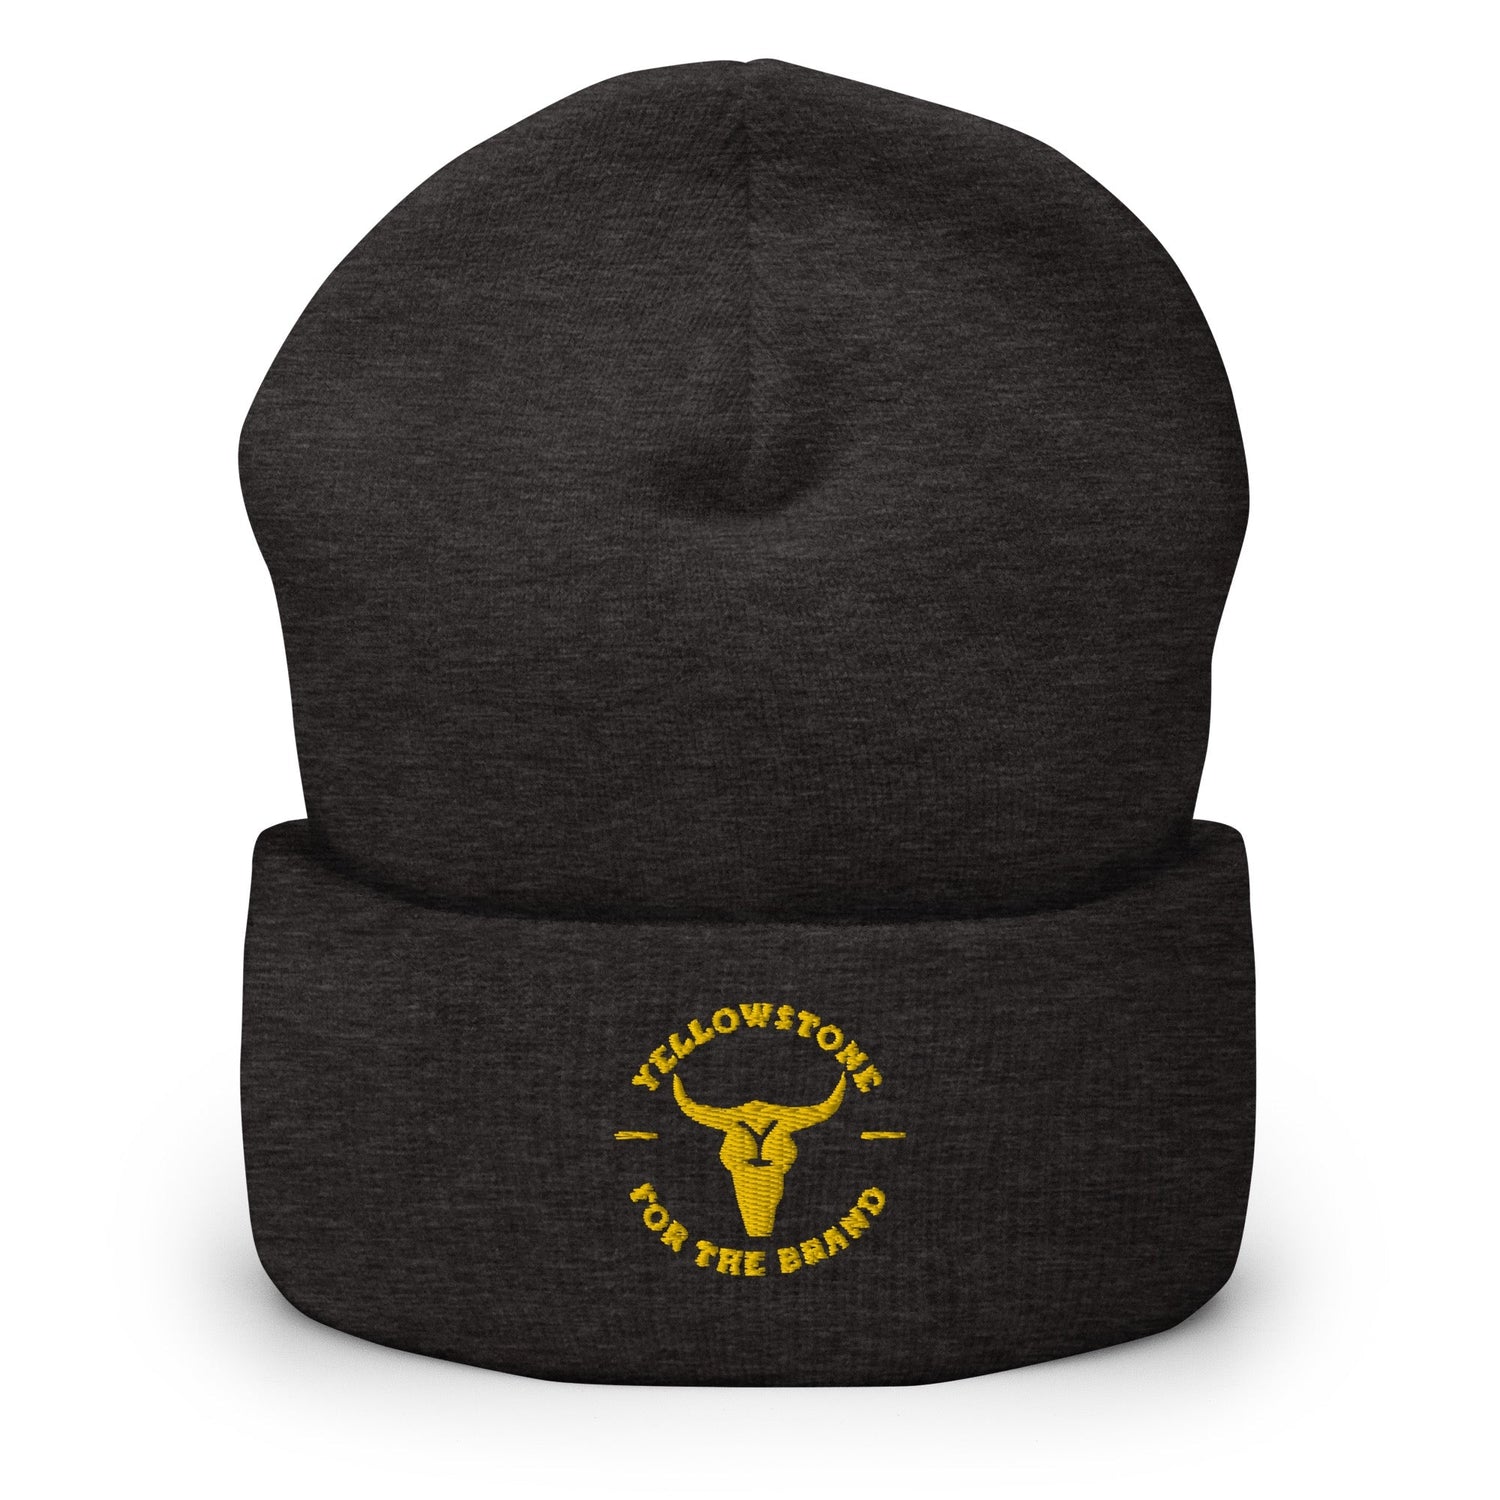 Yellowstone For the Brand Embroidered Beanie - Paramount Shop